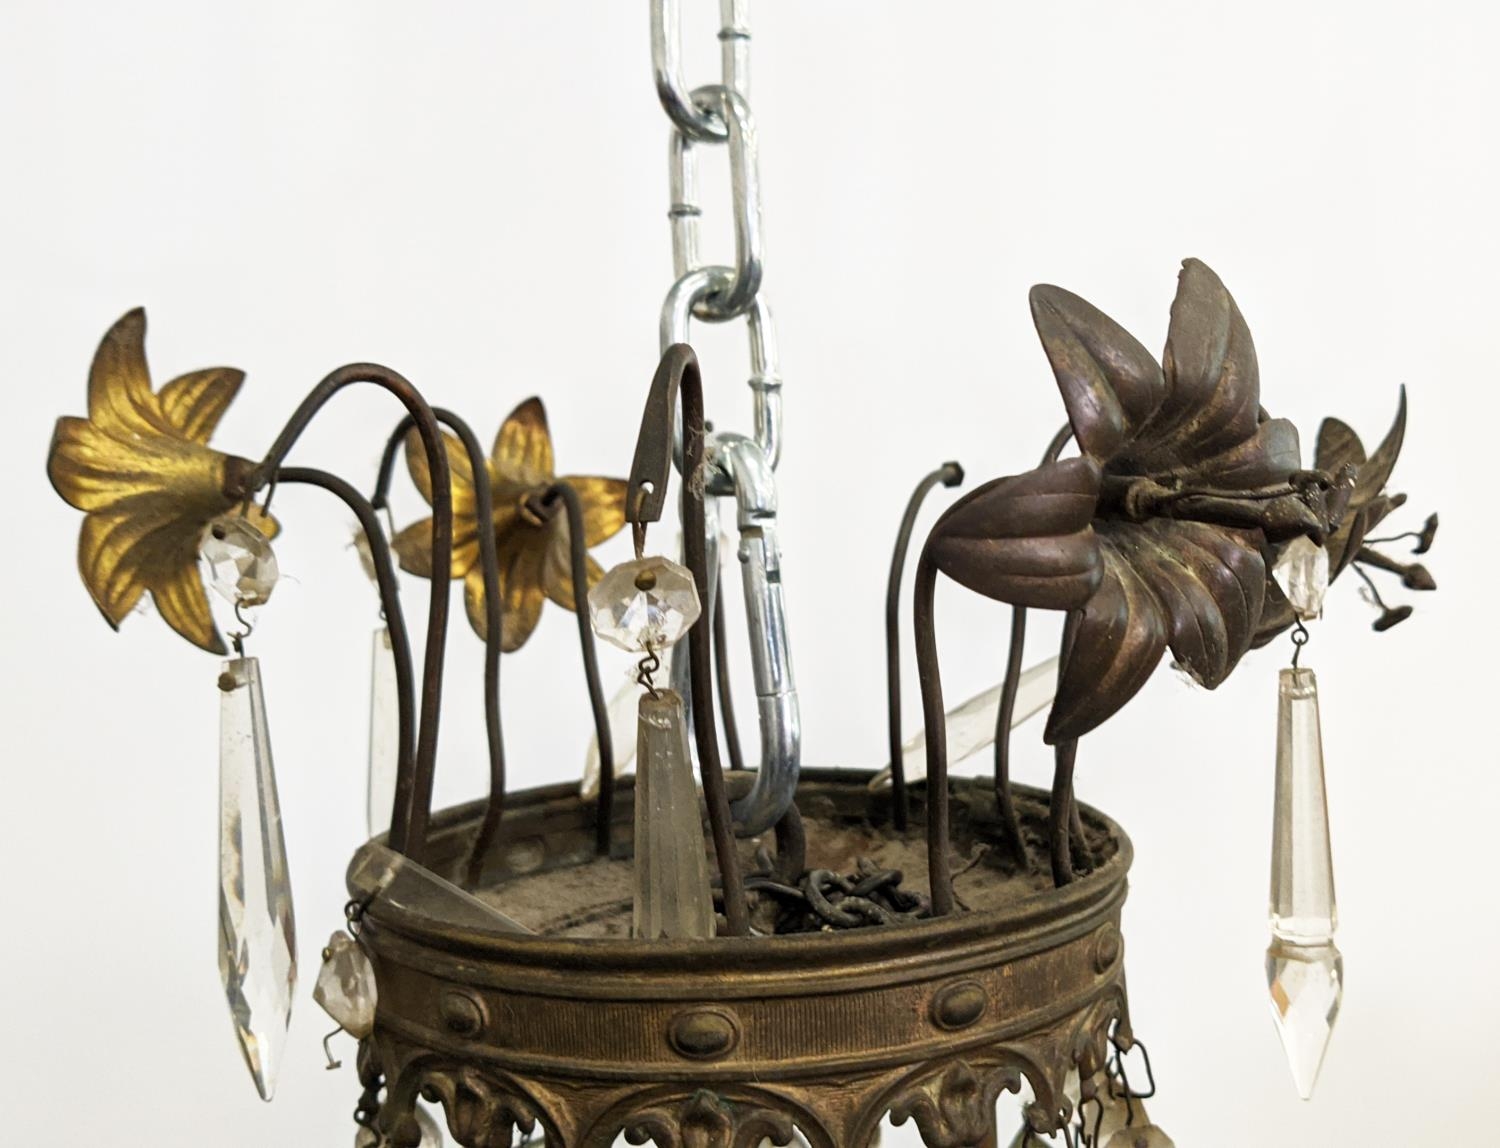 CHANDELIER, late 19th/early 20th century French, six branch, 100cm H approx. - Image 8 of 12